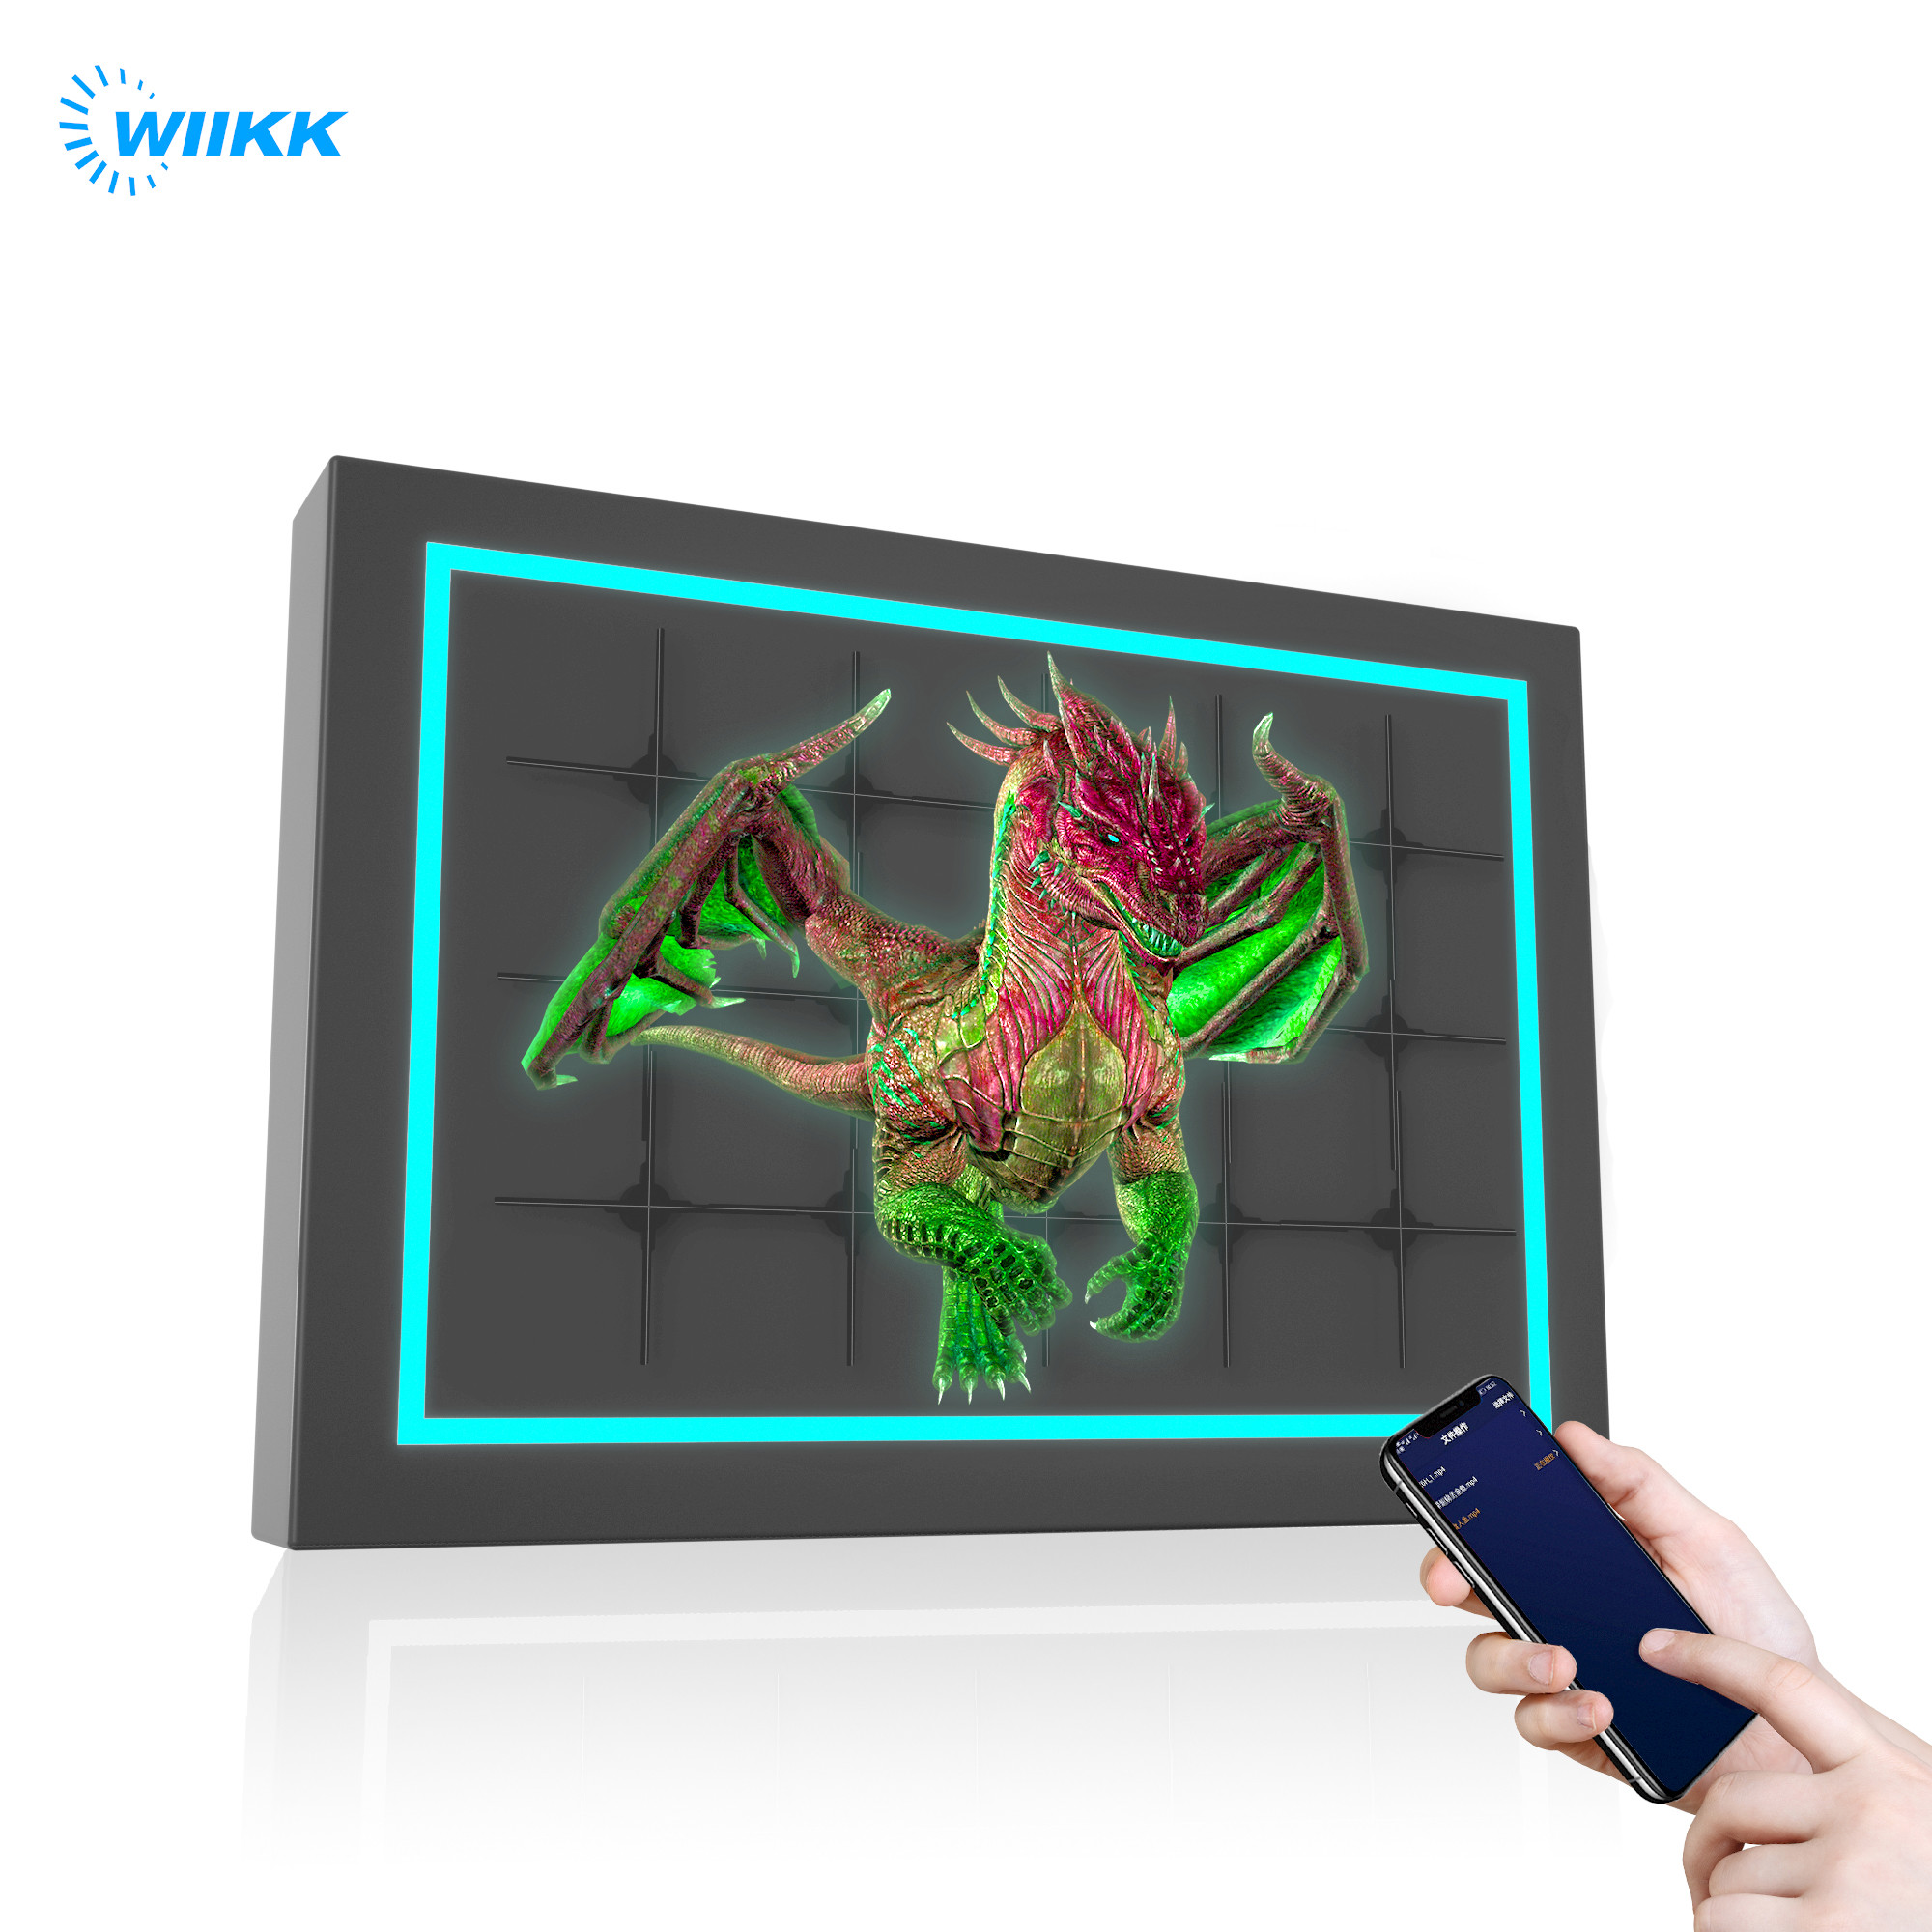  65cm 3D Hologram Fan Display Wall Mounted Screen Synchronization Manufactures